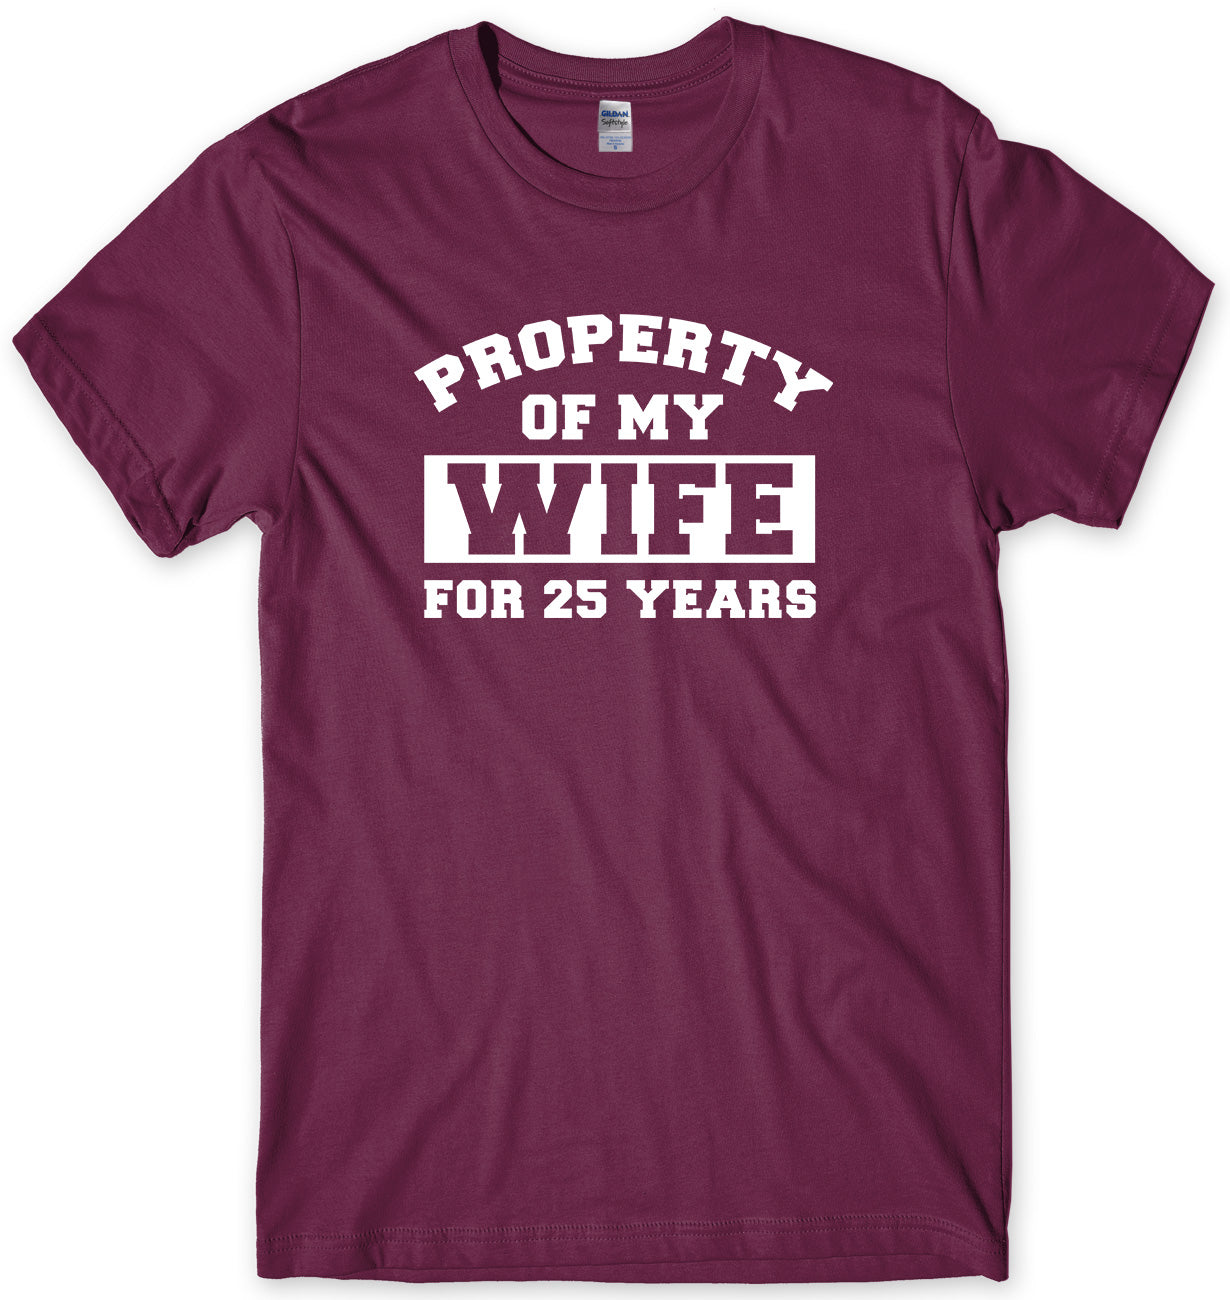 PROPERTY OF MY WIFE FOR 25 YEARS MENS FUNNY UNISEX T-SHIRT